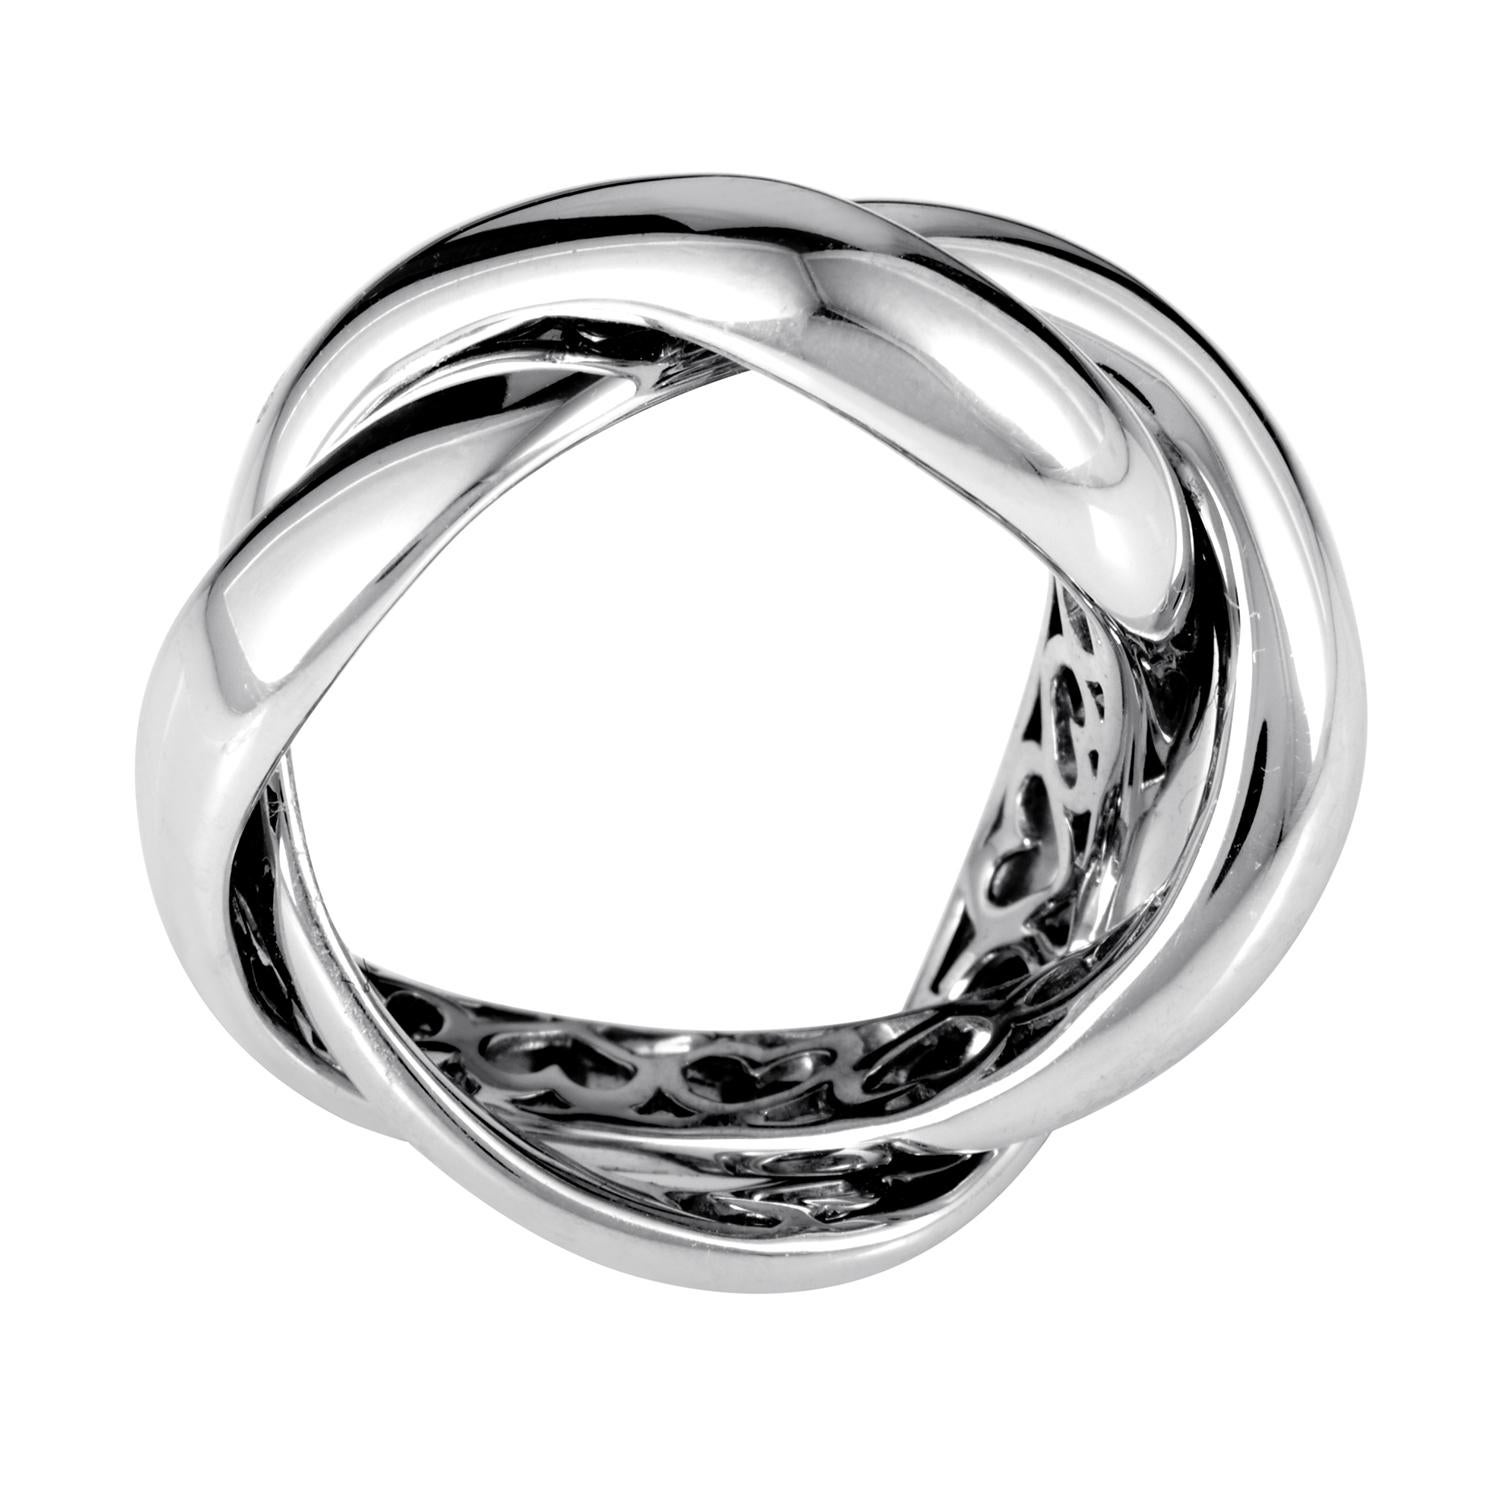 Two bands or precious metal entwine to form a single ring of stunning grace. 18K White Gold is shaped with a smooth, weaving flow, embracing itself between two tides. The result is a unique and compelling ring design from Poiray.
